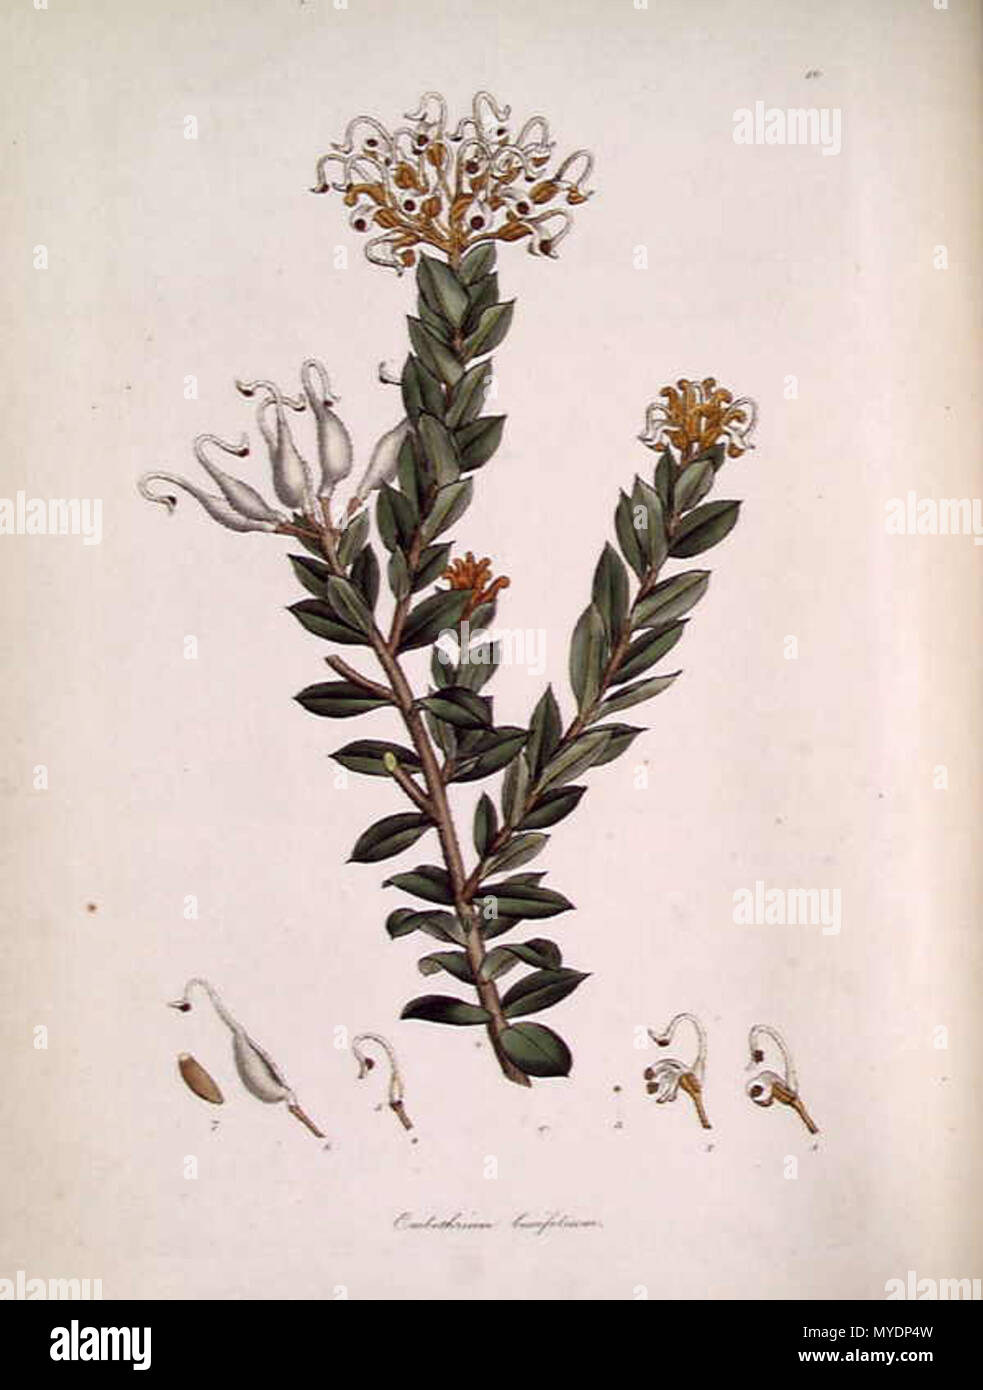 . This is an image of a print of a hand coloured engraving by James Sowerby (1757-1822), based on drawing nominally by John White but probably by the convict artist Thomas Watling. It appeared as Tab. X in James Edward Smith's 1793 A Specimen of the Botany of New Holland. The plant depicted is Grevillea buxifolia (Sm.) but was titled Embothrium buxifolium. The accompanying text at the source of the digital image gives print : engraving with hand colouring ; plate mark 23.7 x 15.0 cm. on sheet 29.0 x 21.3 cm. Engraved on plate u.r.: 10. Title engraved on plate l.c. circa 1794. James Sowerby 159 Stock Photo